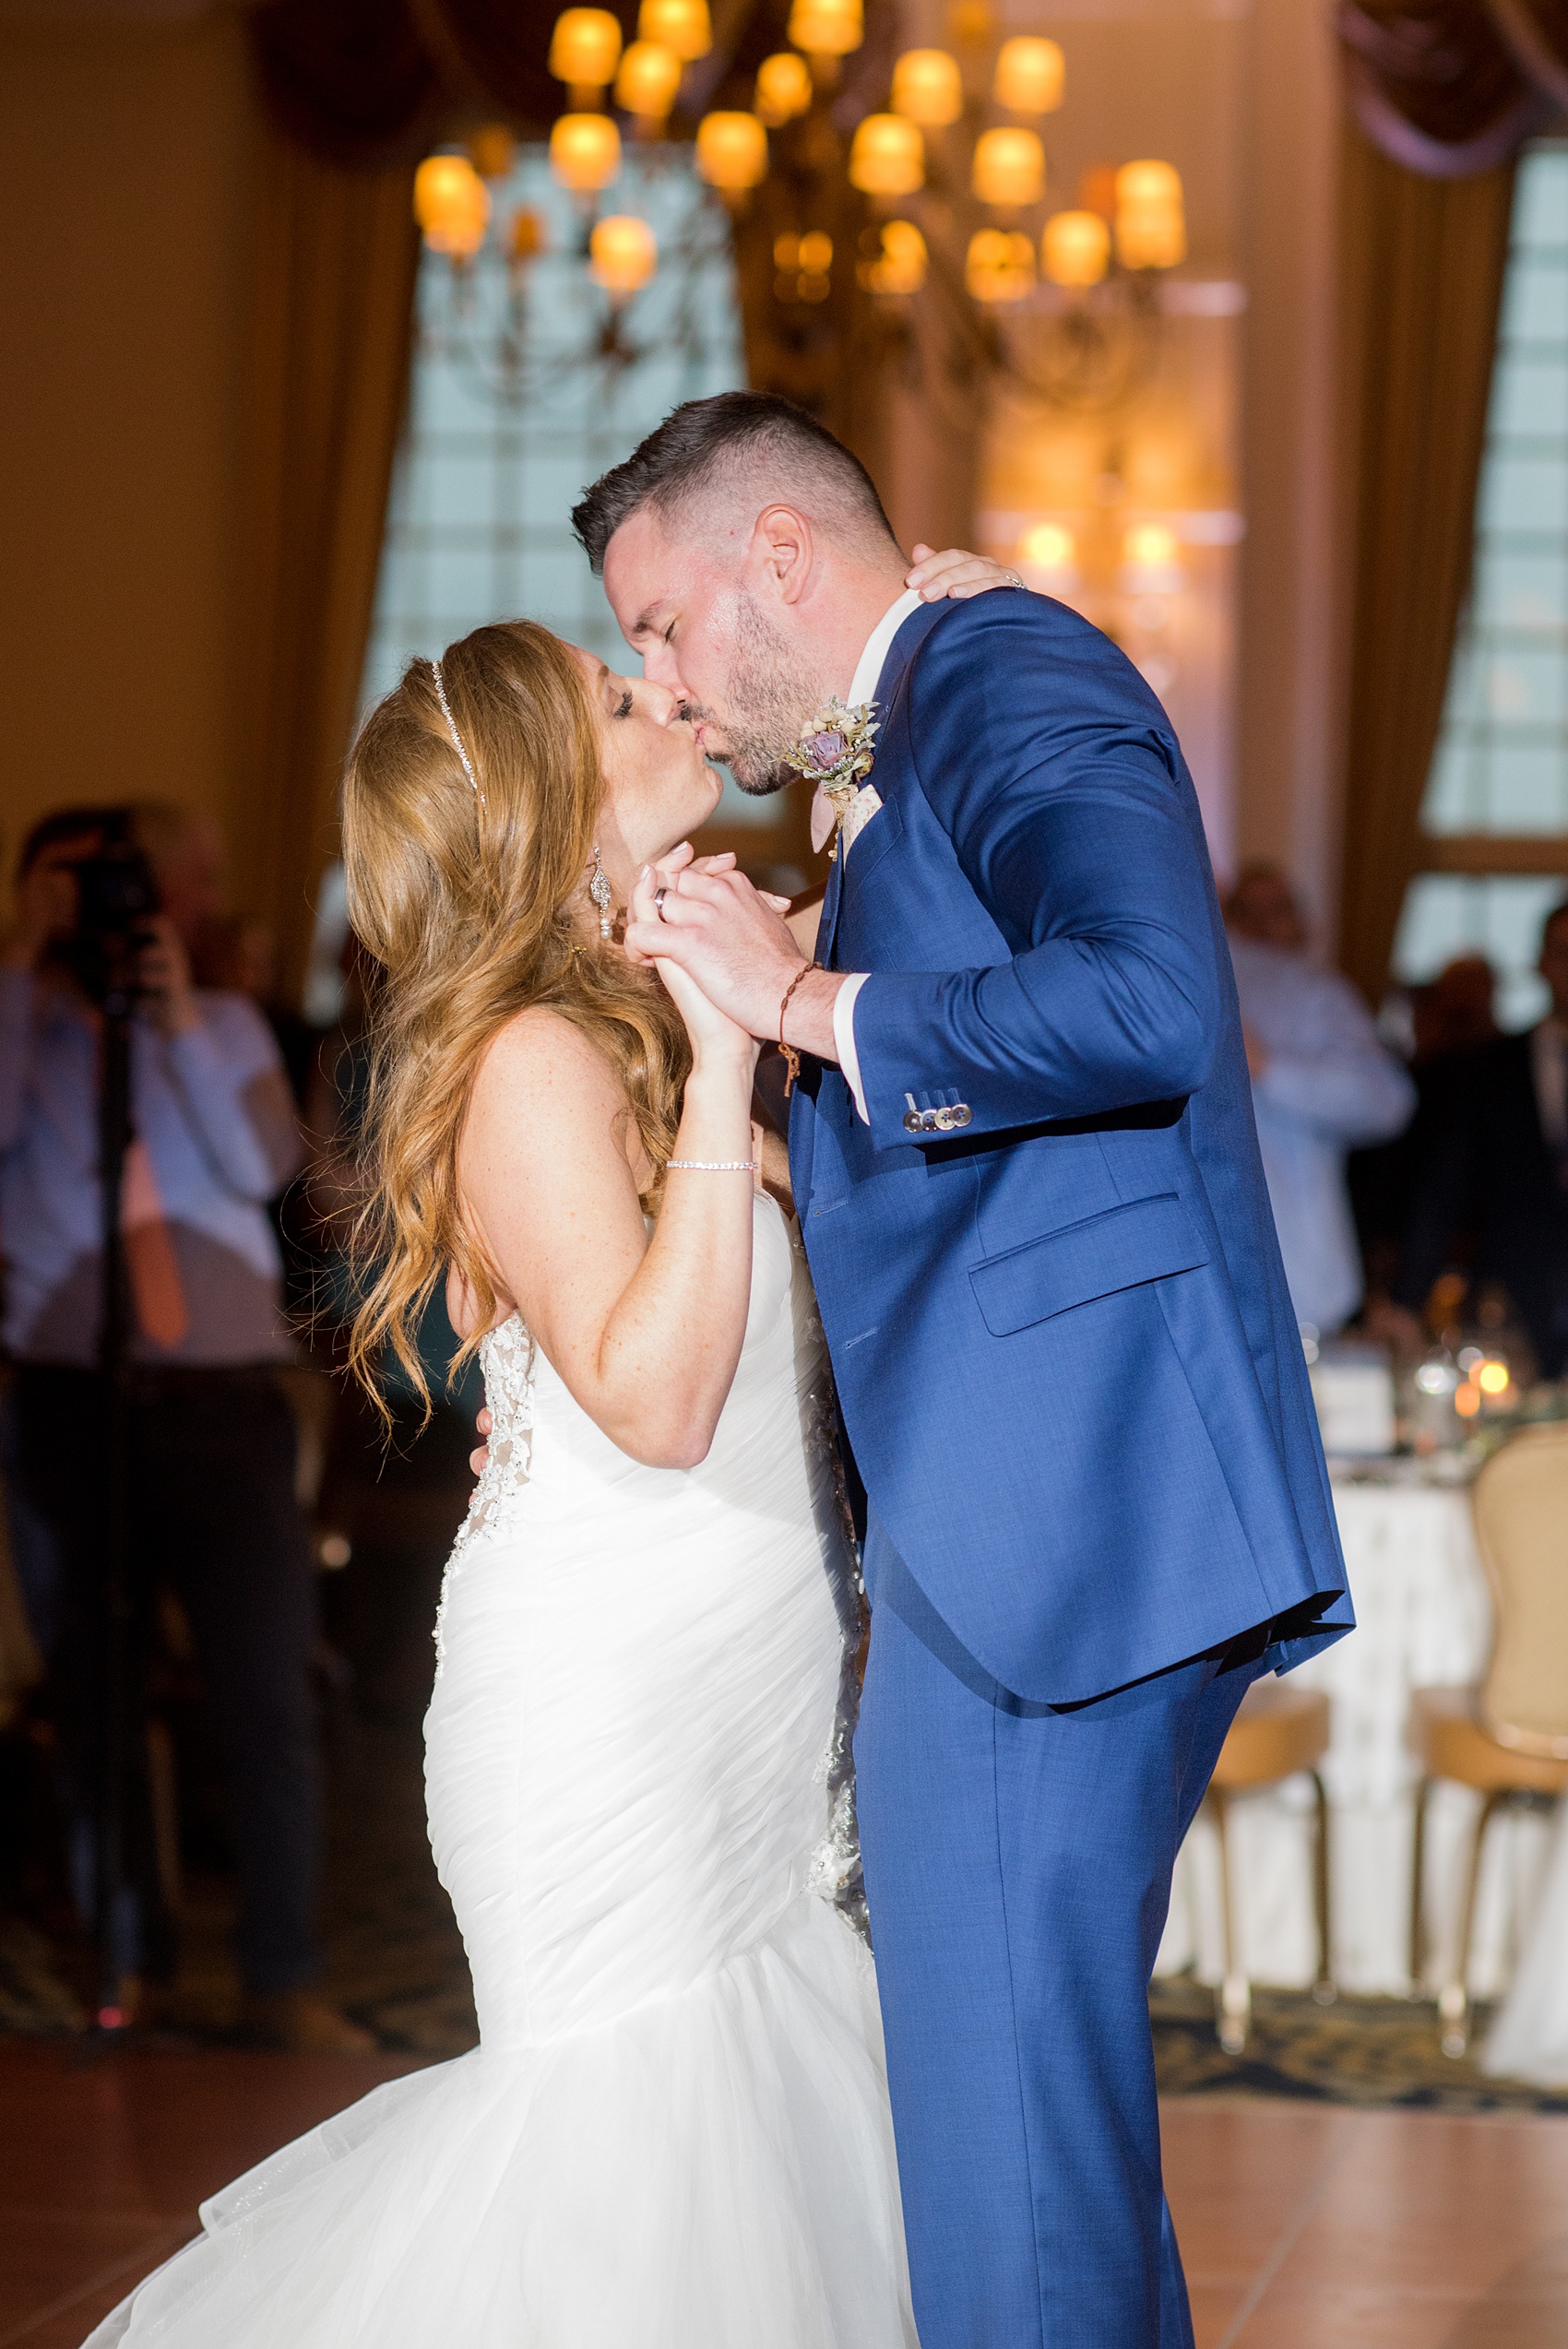 Crystal Springs Resort wedding photos in New Jersey, with photographer Mikkel Paige Photography. The couple’s spring wedding had an outdoor ceremony with photos at this rustic, woodsy venue showing their blue and pink palette decor from getting ready to their reception. This picture shows the bride and groom dancing their first dance. Click through to see their complete wedding recap! #NewJerseywedding #MikkelPaige #NJweddingphotographer #NJphotographer #springwedding #pinkandblue #escortcards #escortcardtable